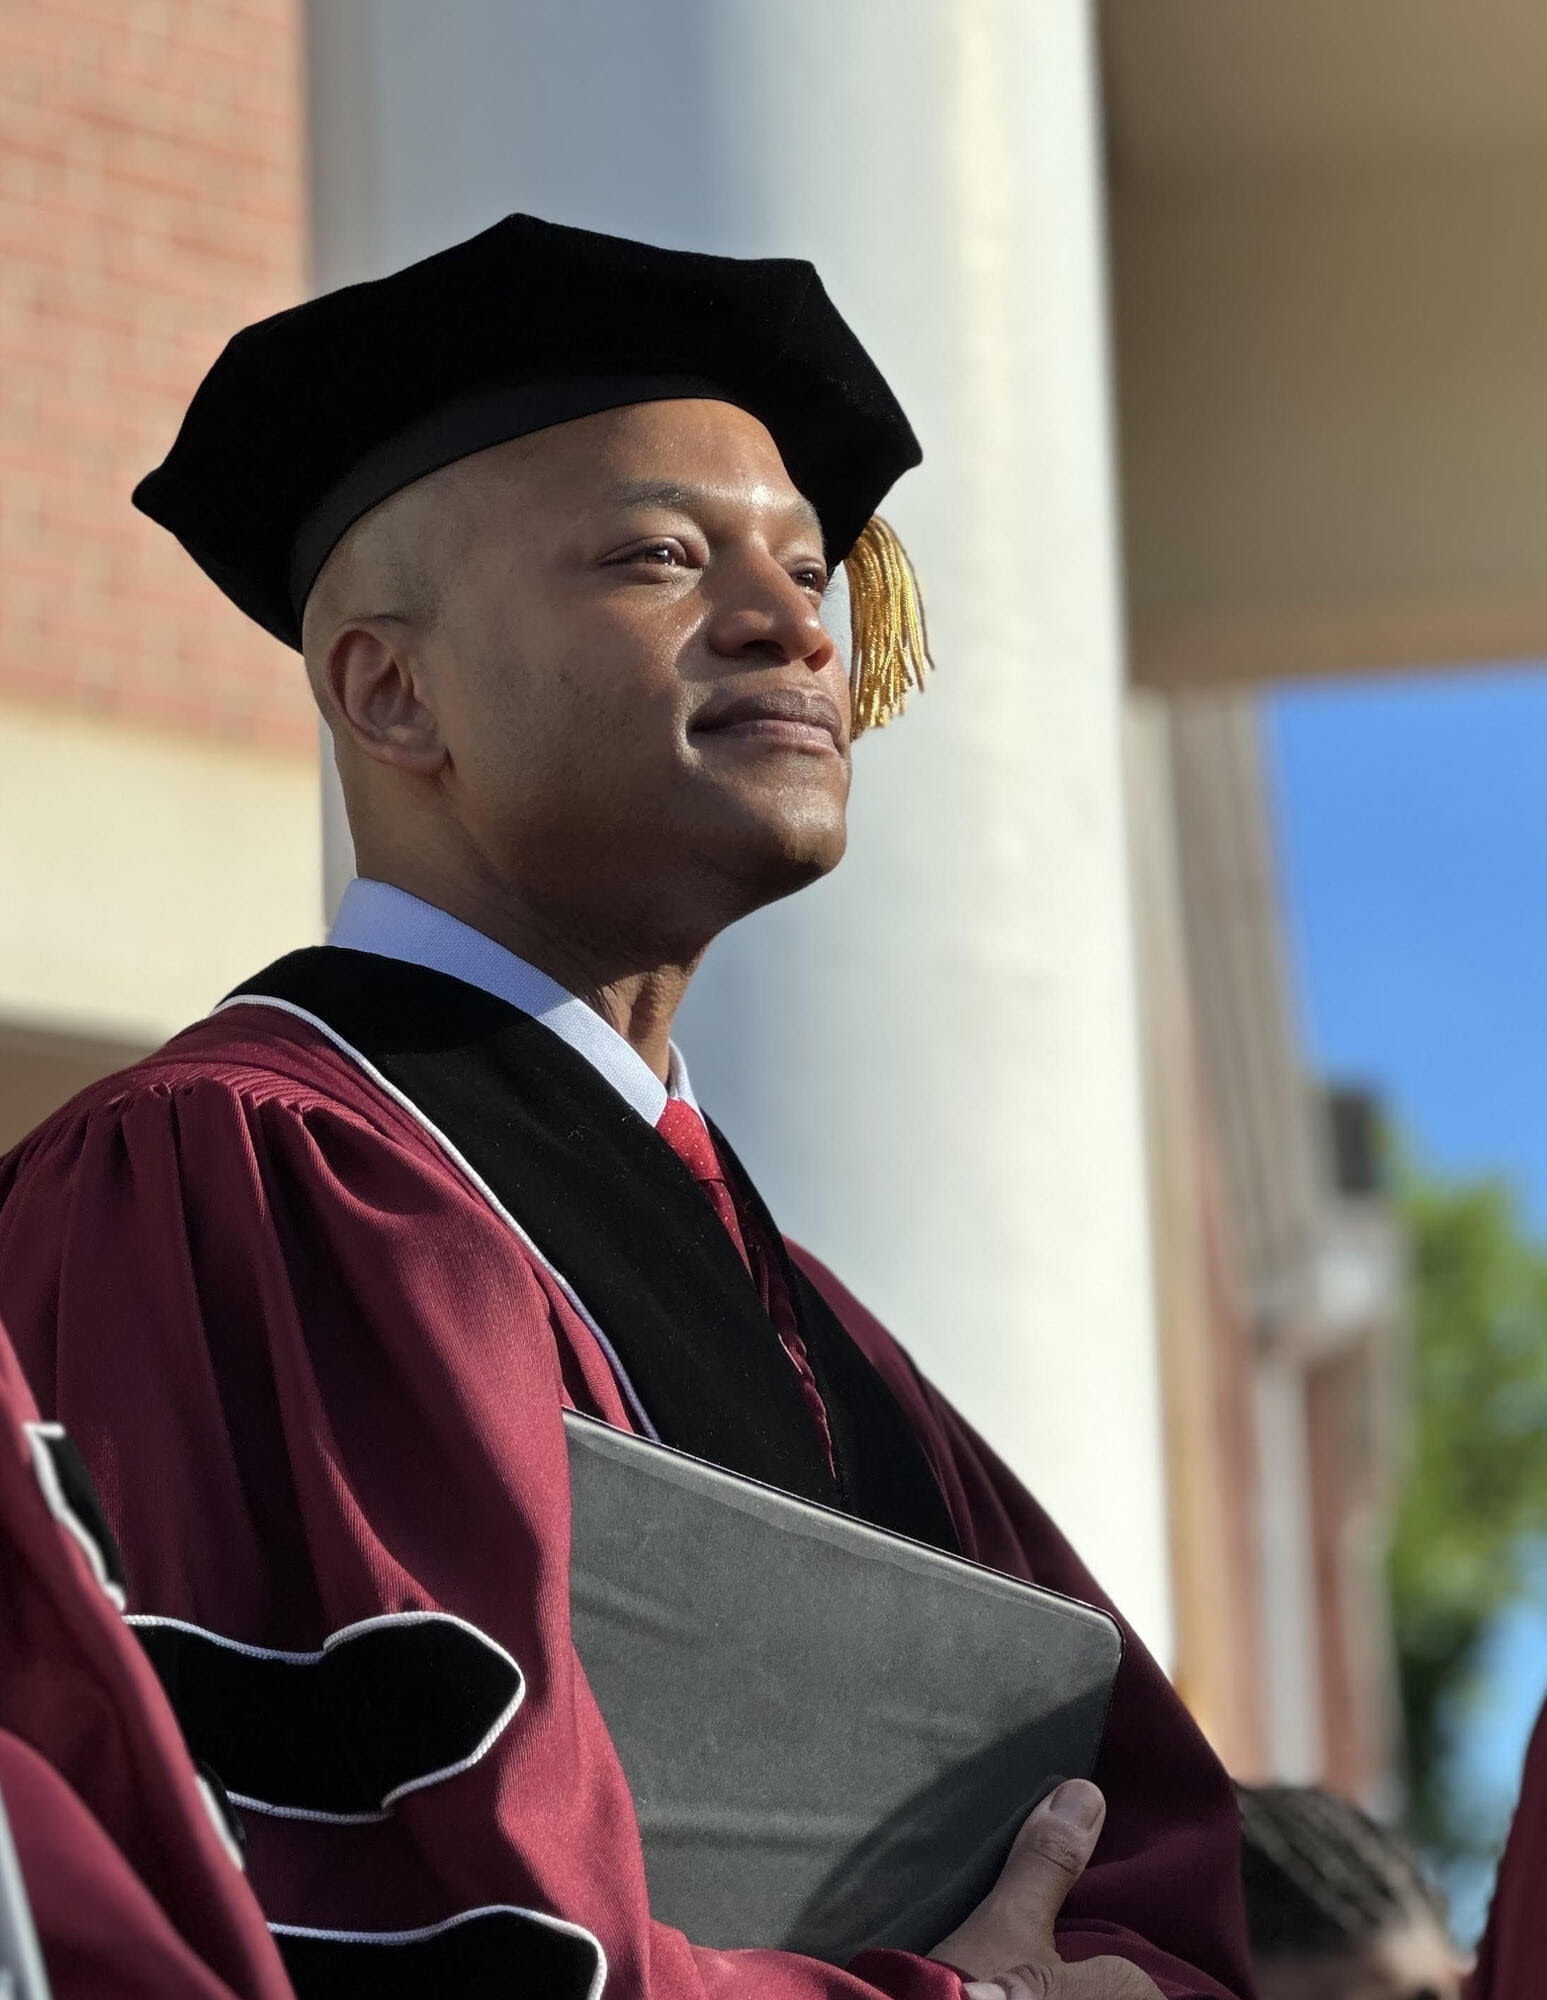 Gov Wes Moore at Morehouse College with diploma